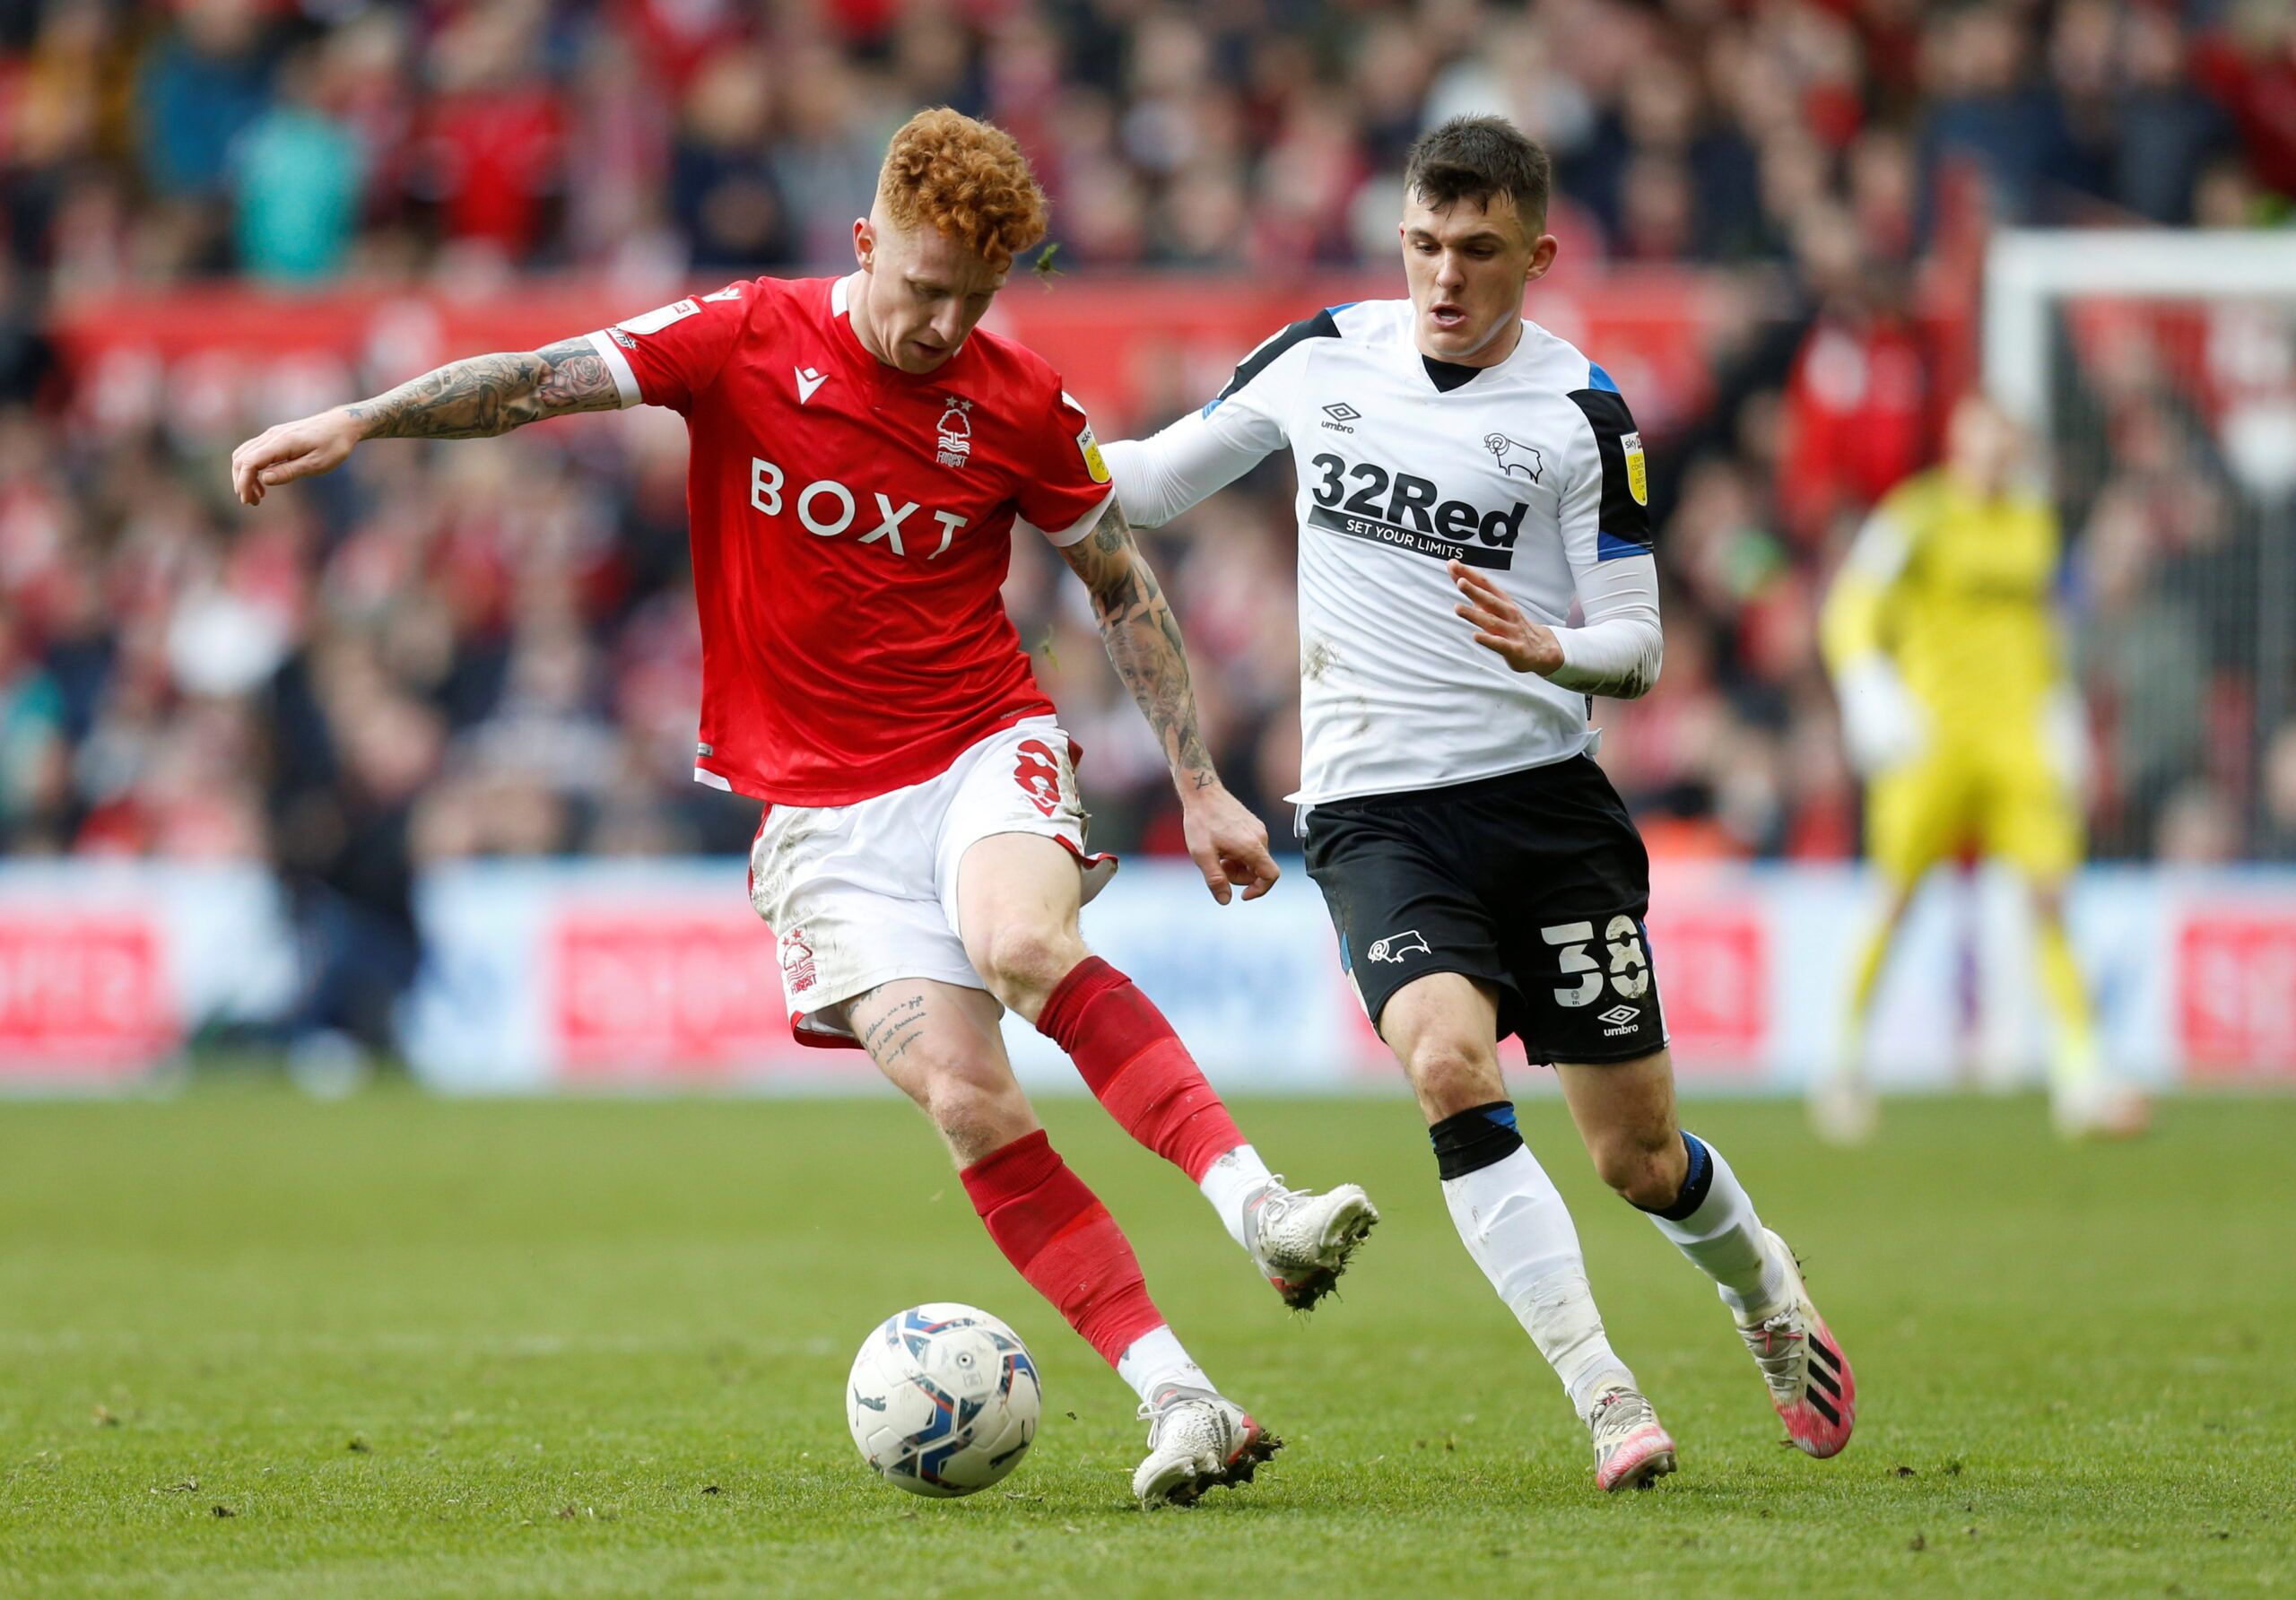 Soccer Football - Championship - Nottingham Forest v Derby County - The City Ground, Nottingham, Britain - January 22, 2022 Nottingham Forest's Jack Colback in action with Derby County's Jason Knight   Action Images/Ed Sykes  EDITORIAL USE ONLY. No use with unauthorized audio, video, data, fixture lists, club/league logos or 